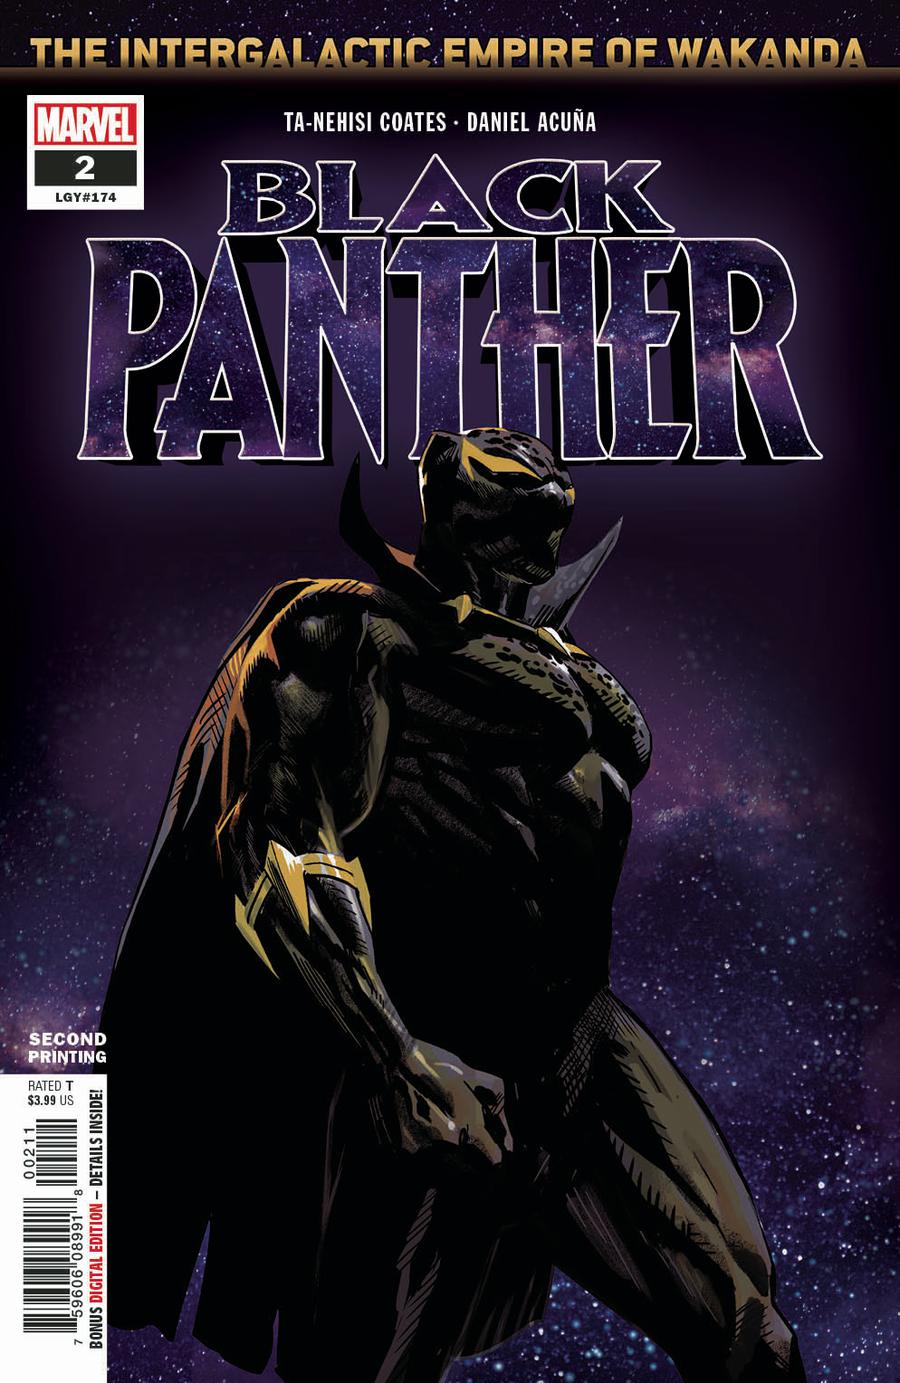 Black Panther #3 MARVEL COMICS COVER A 1ST PRINT COATES ACUNA